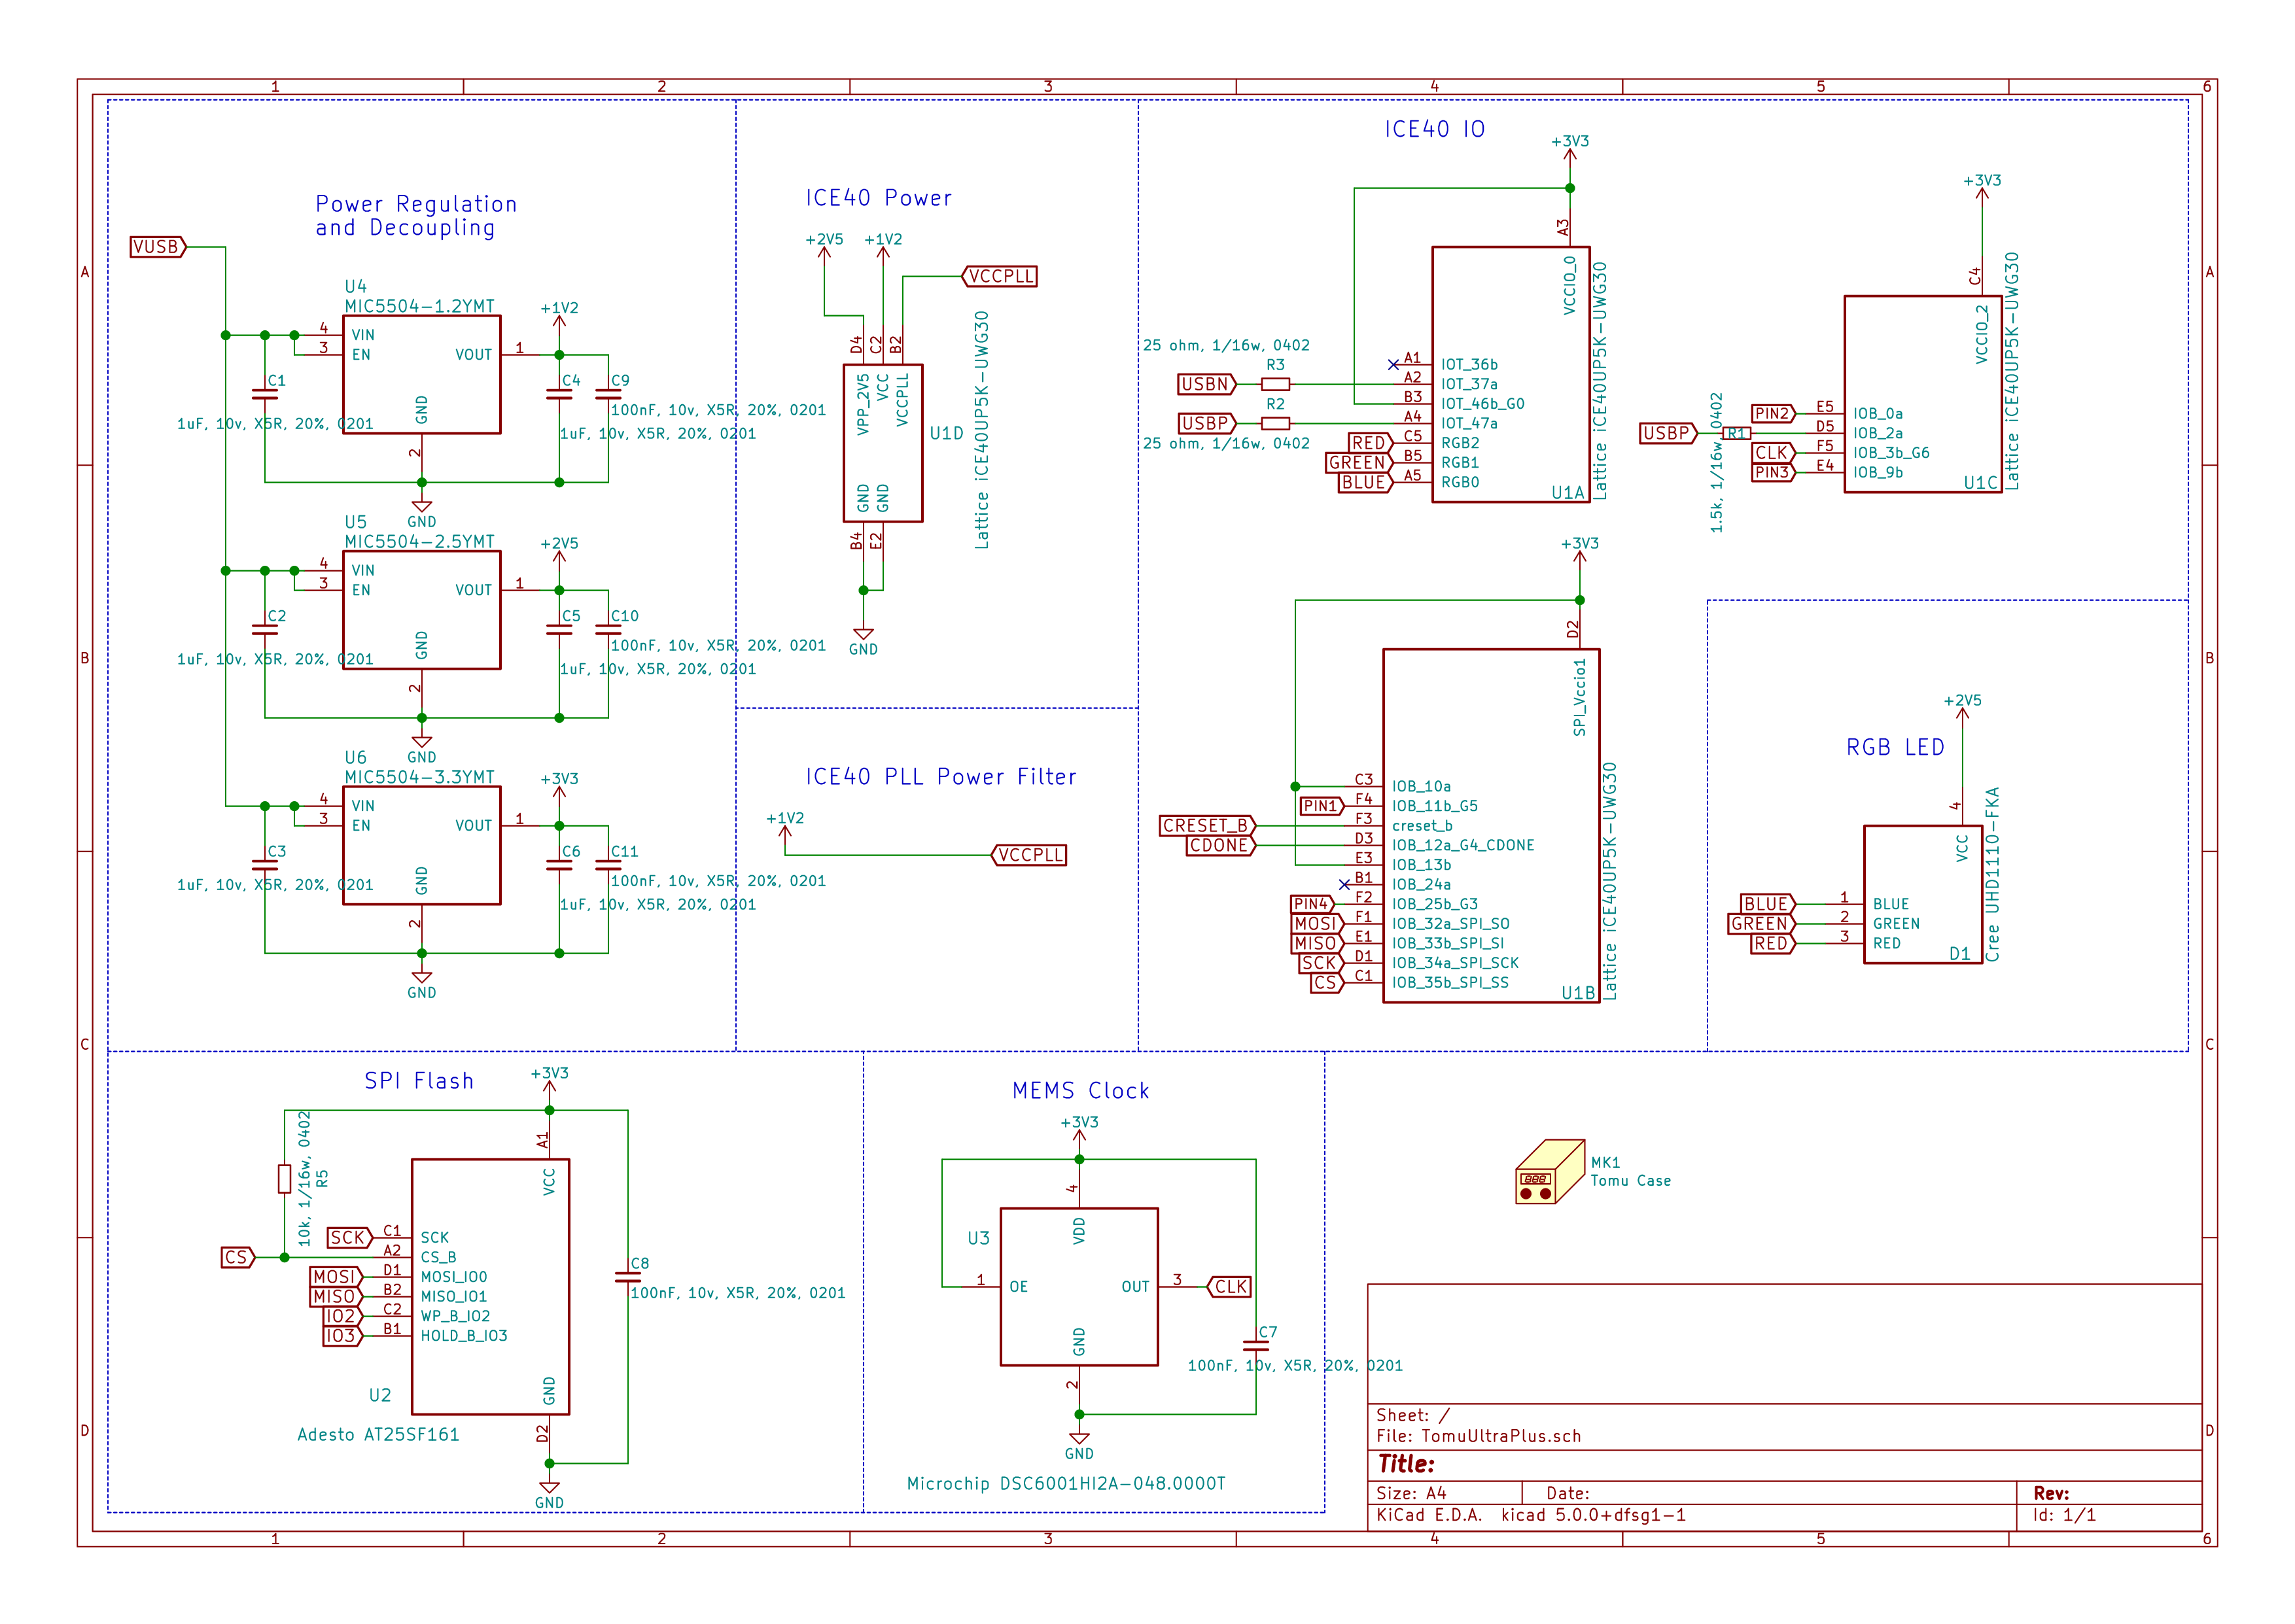 A schematic for 'TomuUltraPlus' created in Kicad. The schematic is separated into 7 logical blocks: power regulation and decoupling, SPI flash, MEMS clock, RGB LED, ICE40 power, ICE40 PLL power filter and ICE40 IO.